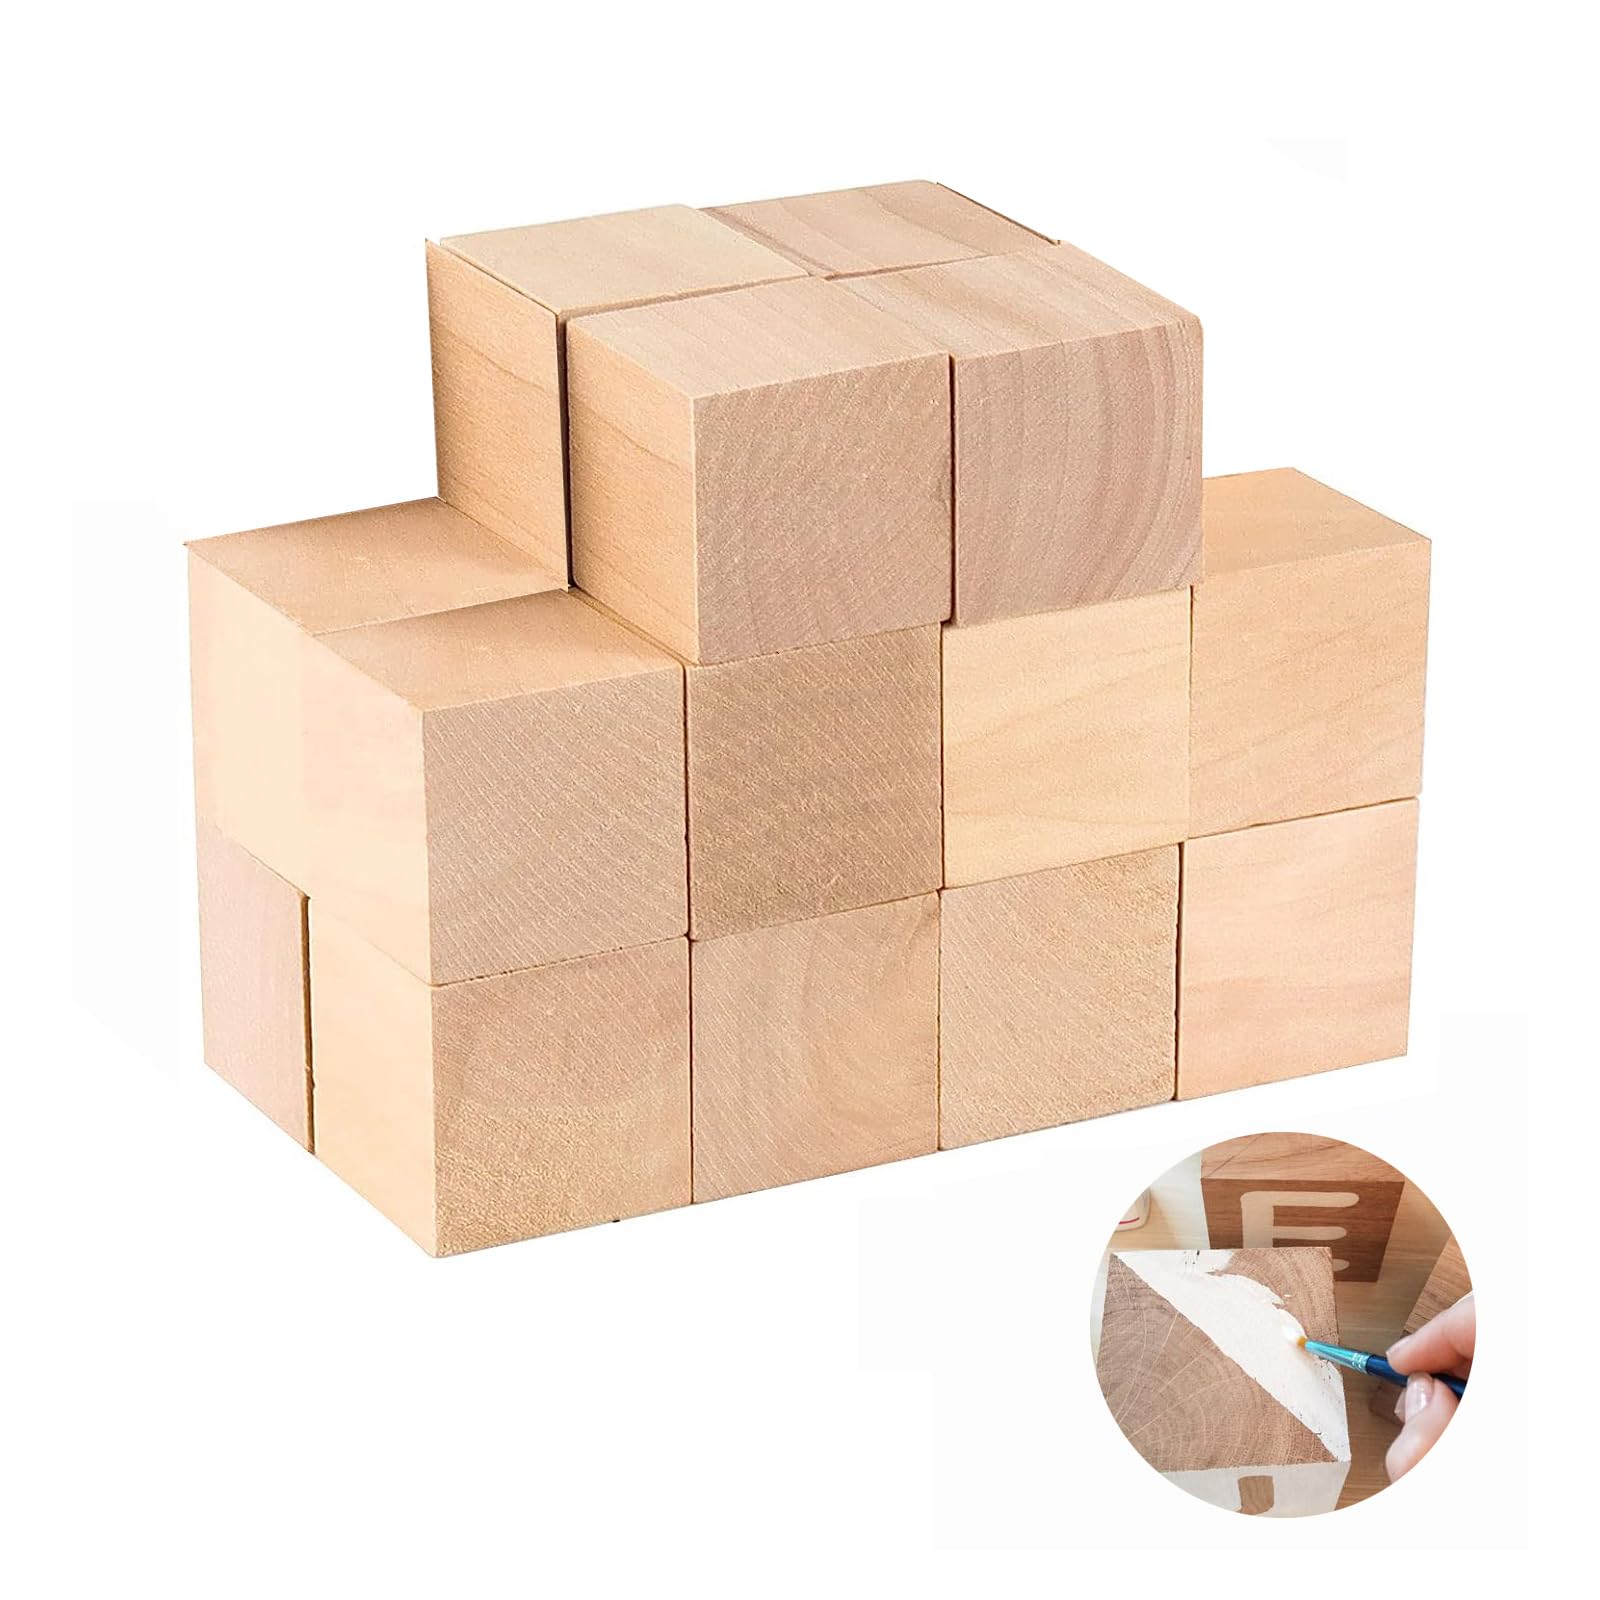 Blank Wood Blocks for Crafting, 2 inch 10PCS Unfinished Large Wooden Blocks  for Crafts and Decor, Natural Solid Wooden Squares Wood Cubes for Baby